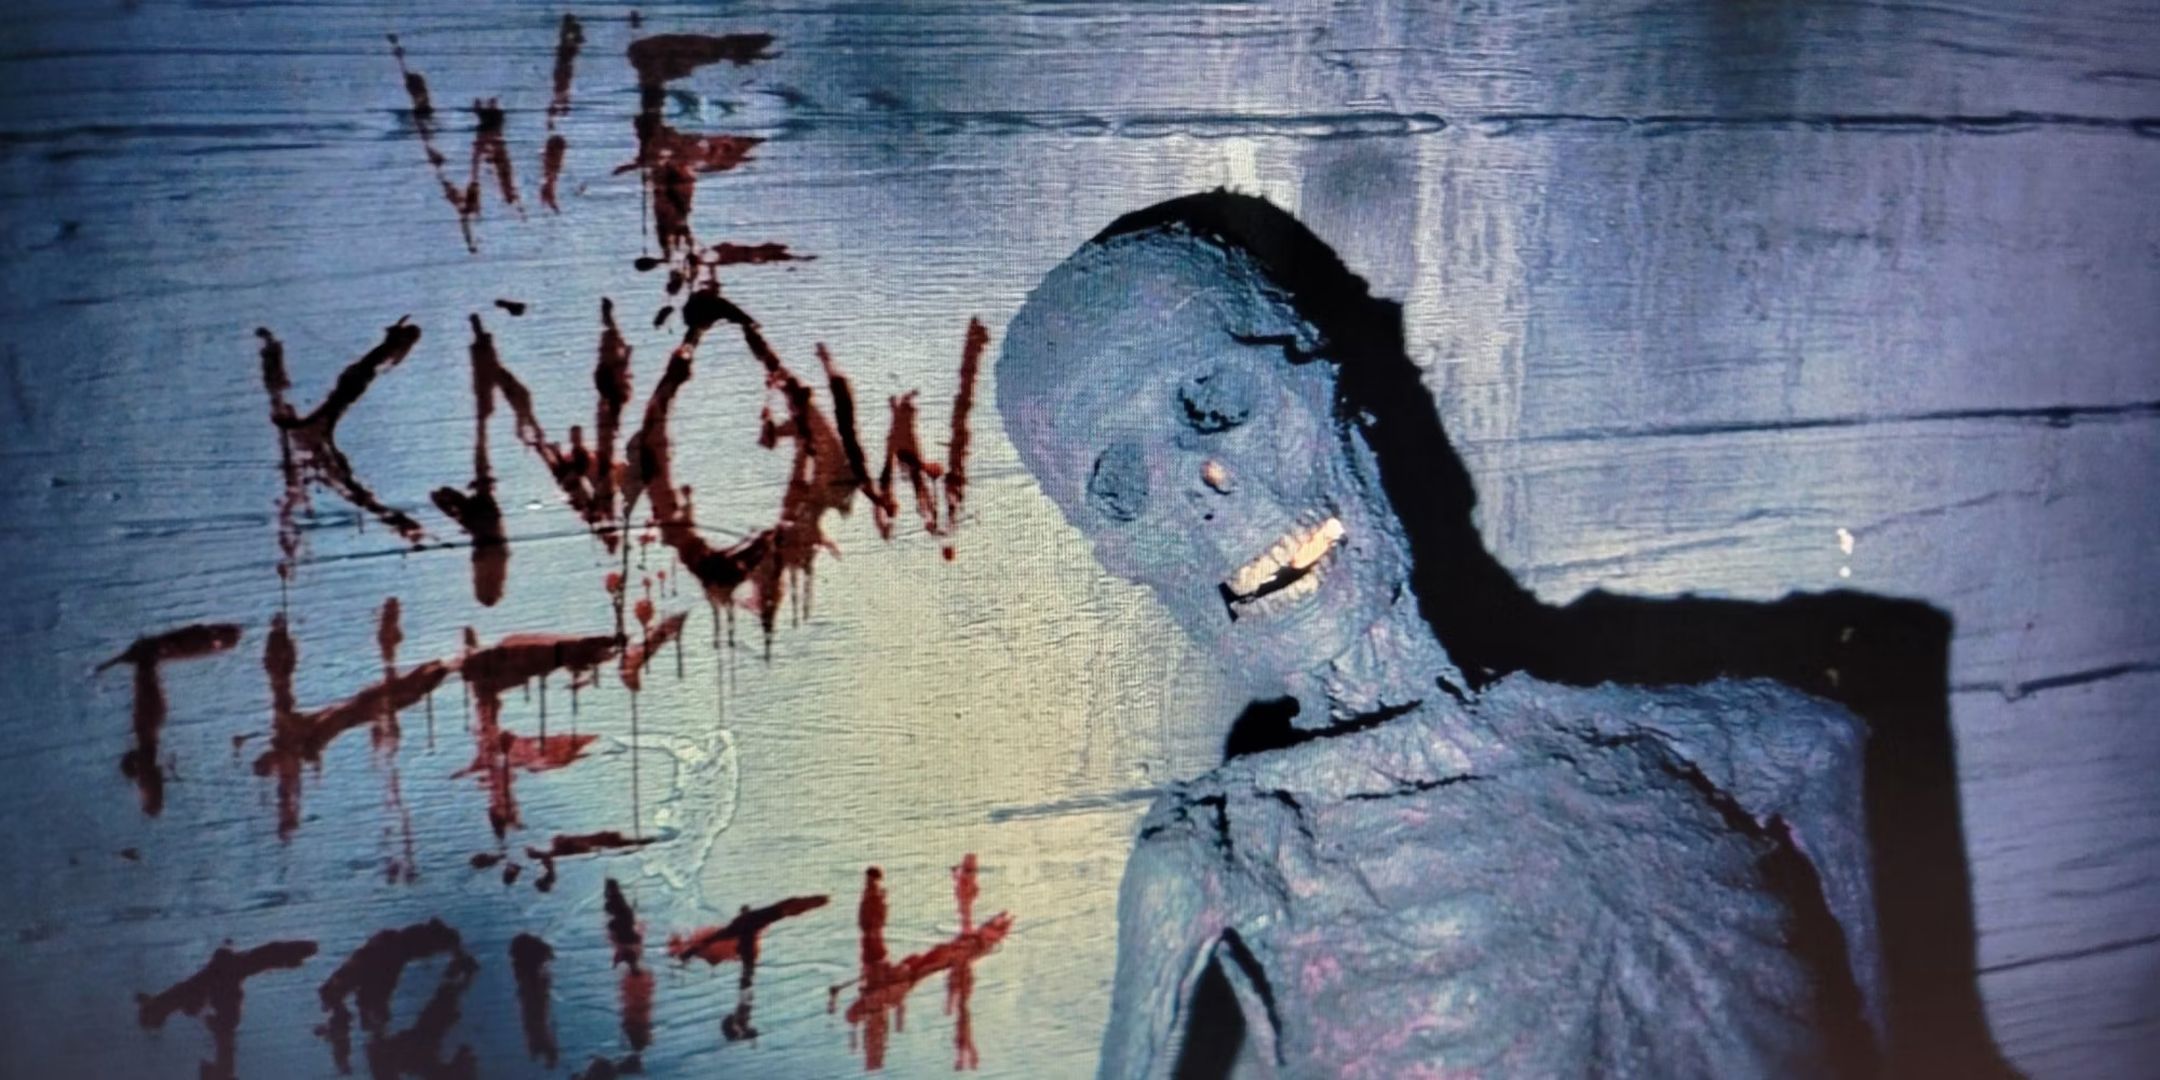 Fallout TV series old skeletal corpse in front of a wooden wall with We Know The Truth written in blood